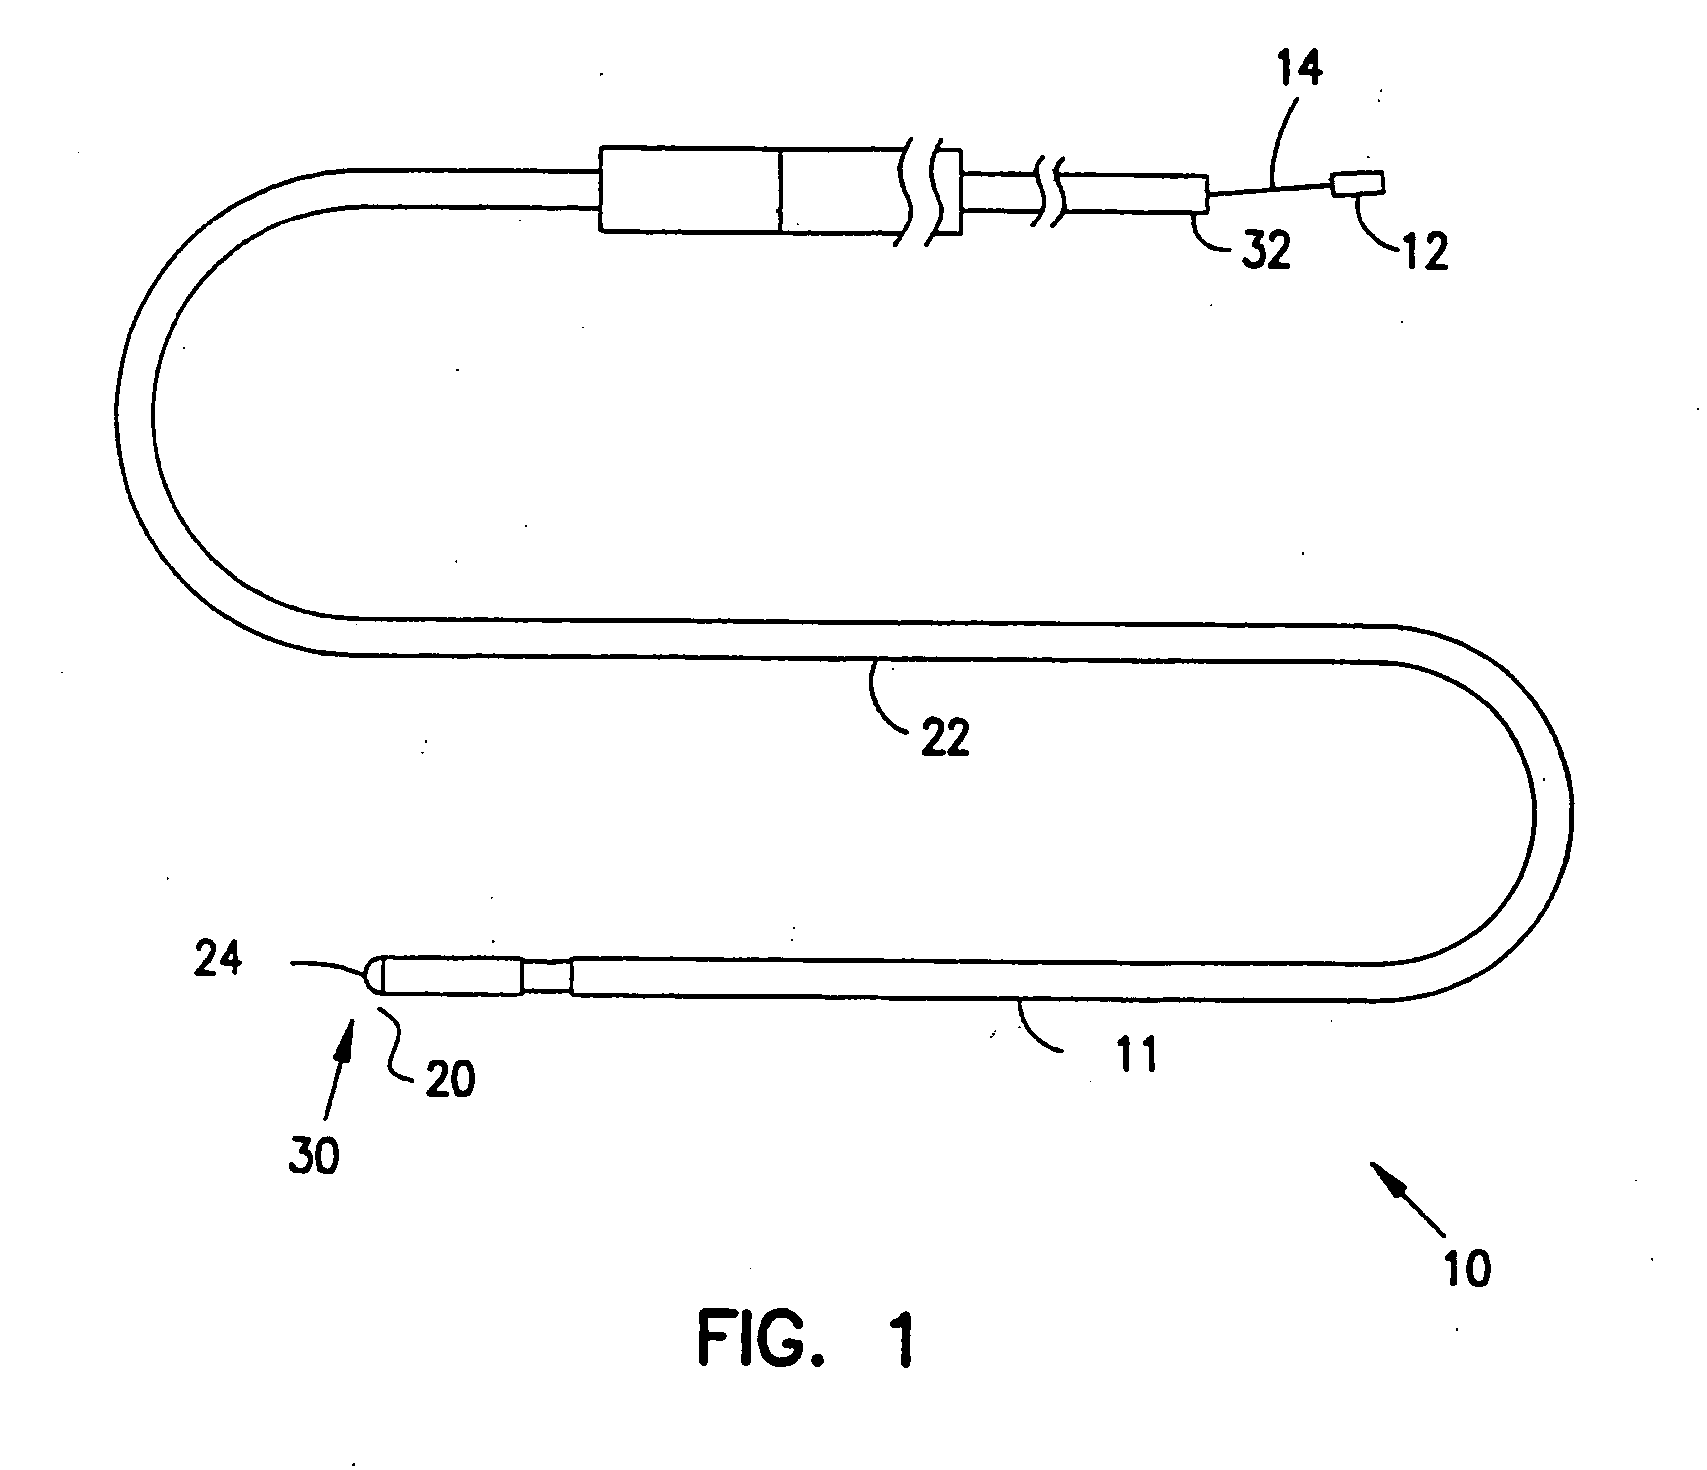 Expandable seal for use with medical device and system